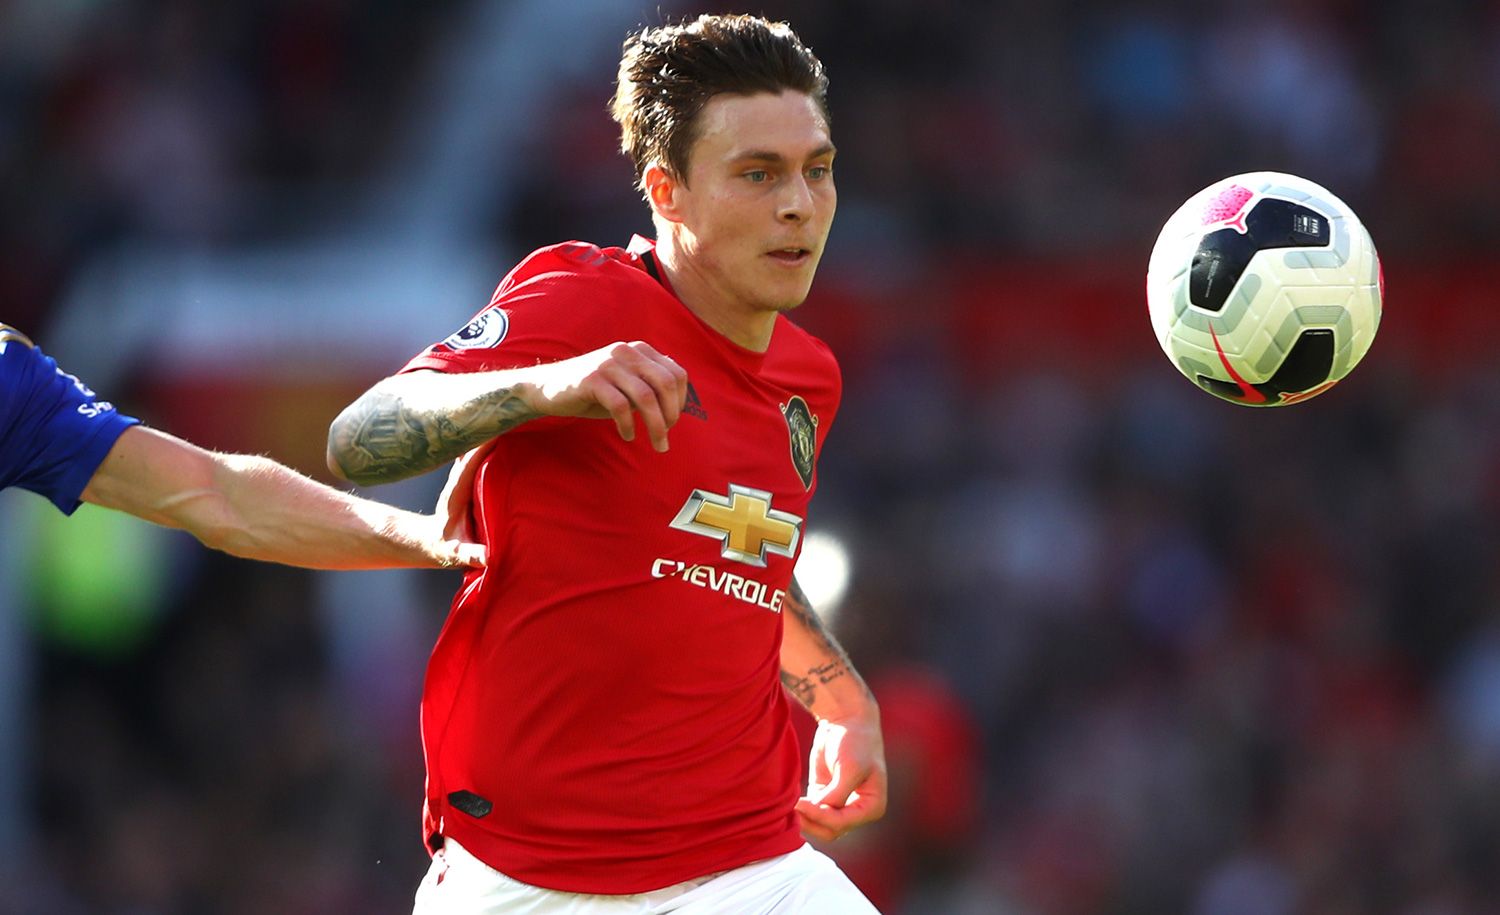 Lindelof In a party with the Manchester United